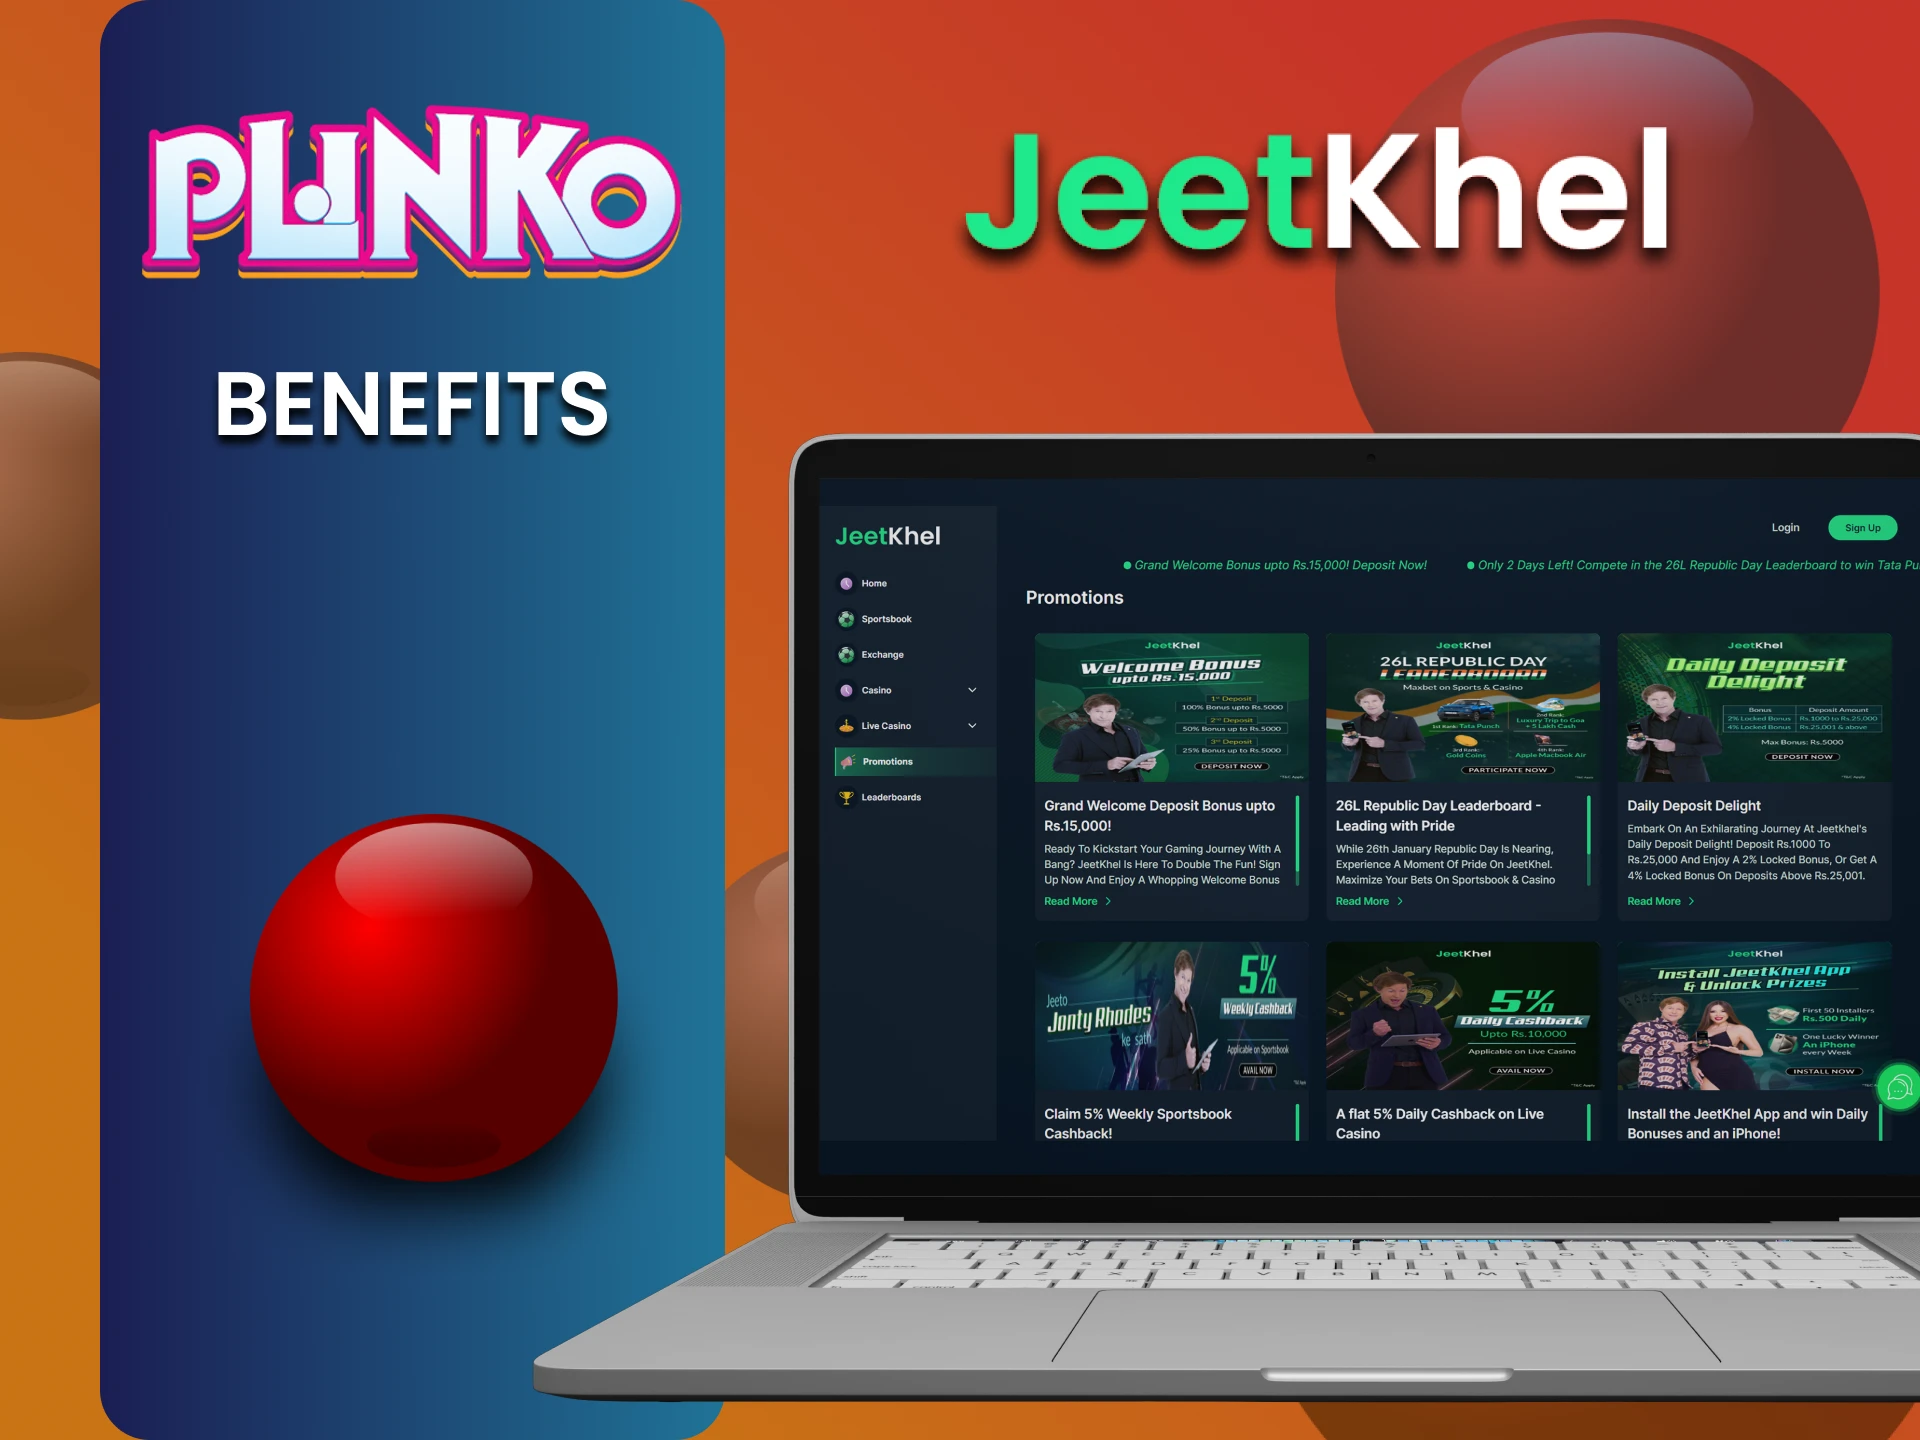 We will tell you about the benefits of JeetKhel for playing Plinko.